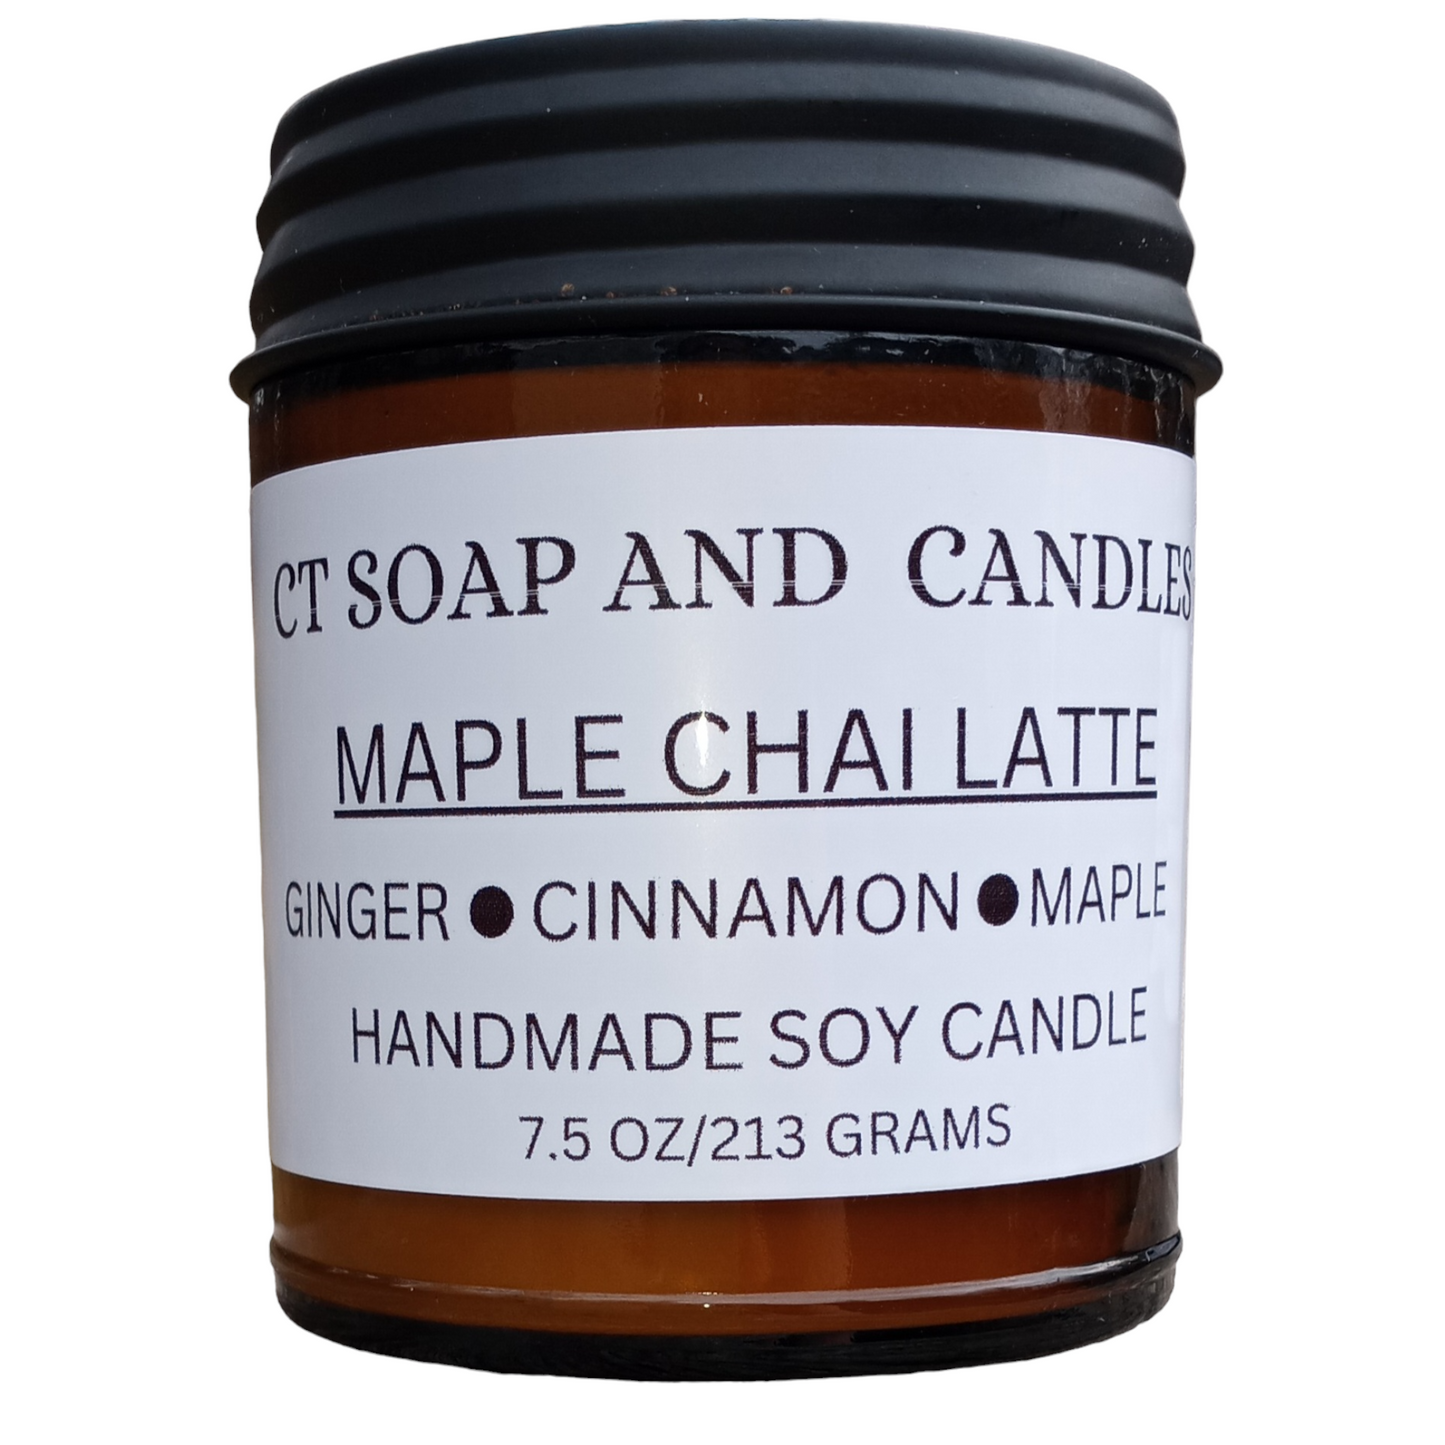 Maple Chai Latte Soy Wax Candle